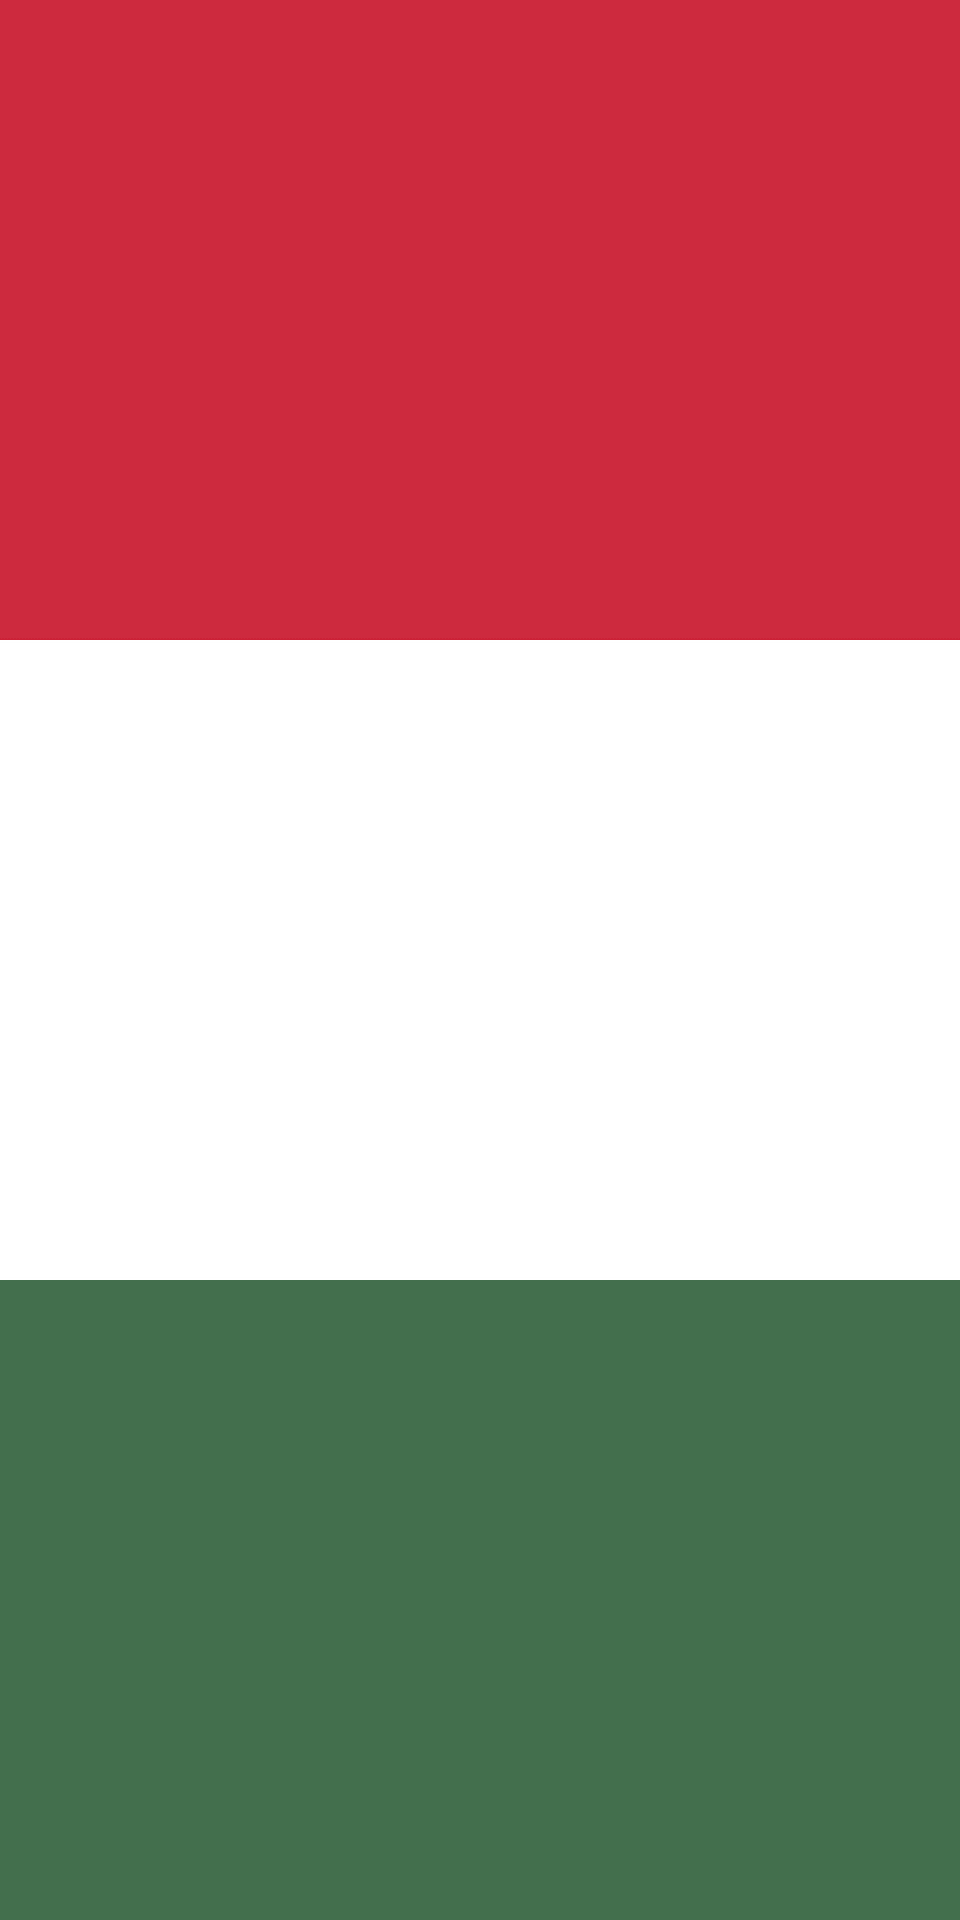 Flag Of Hungary 2 1 Aspect Ratio Clipart Free Png Download